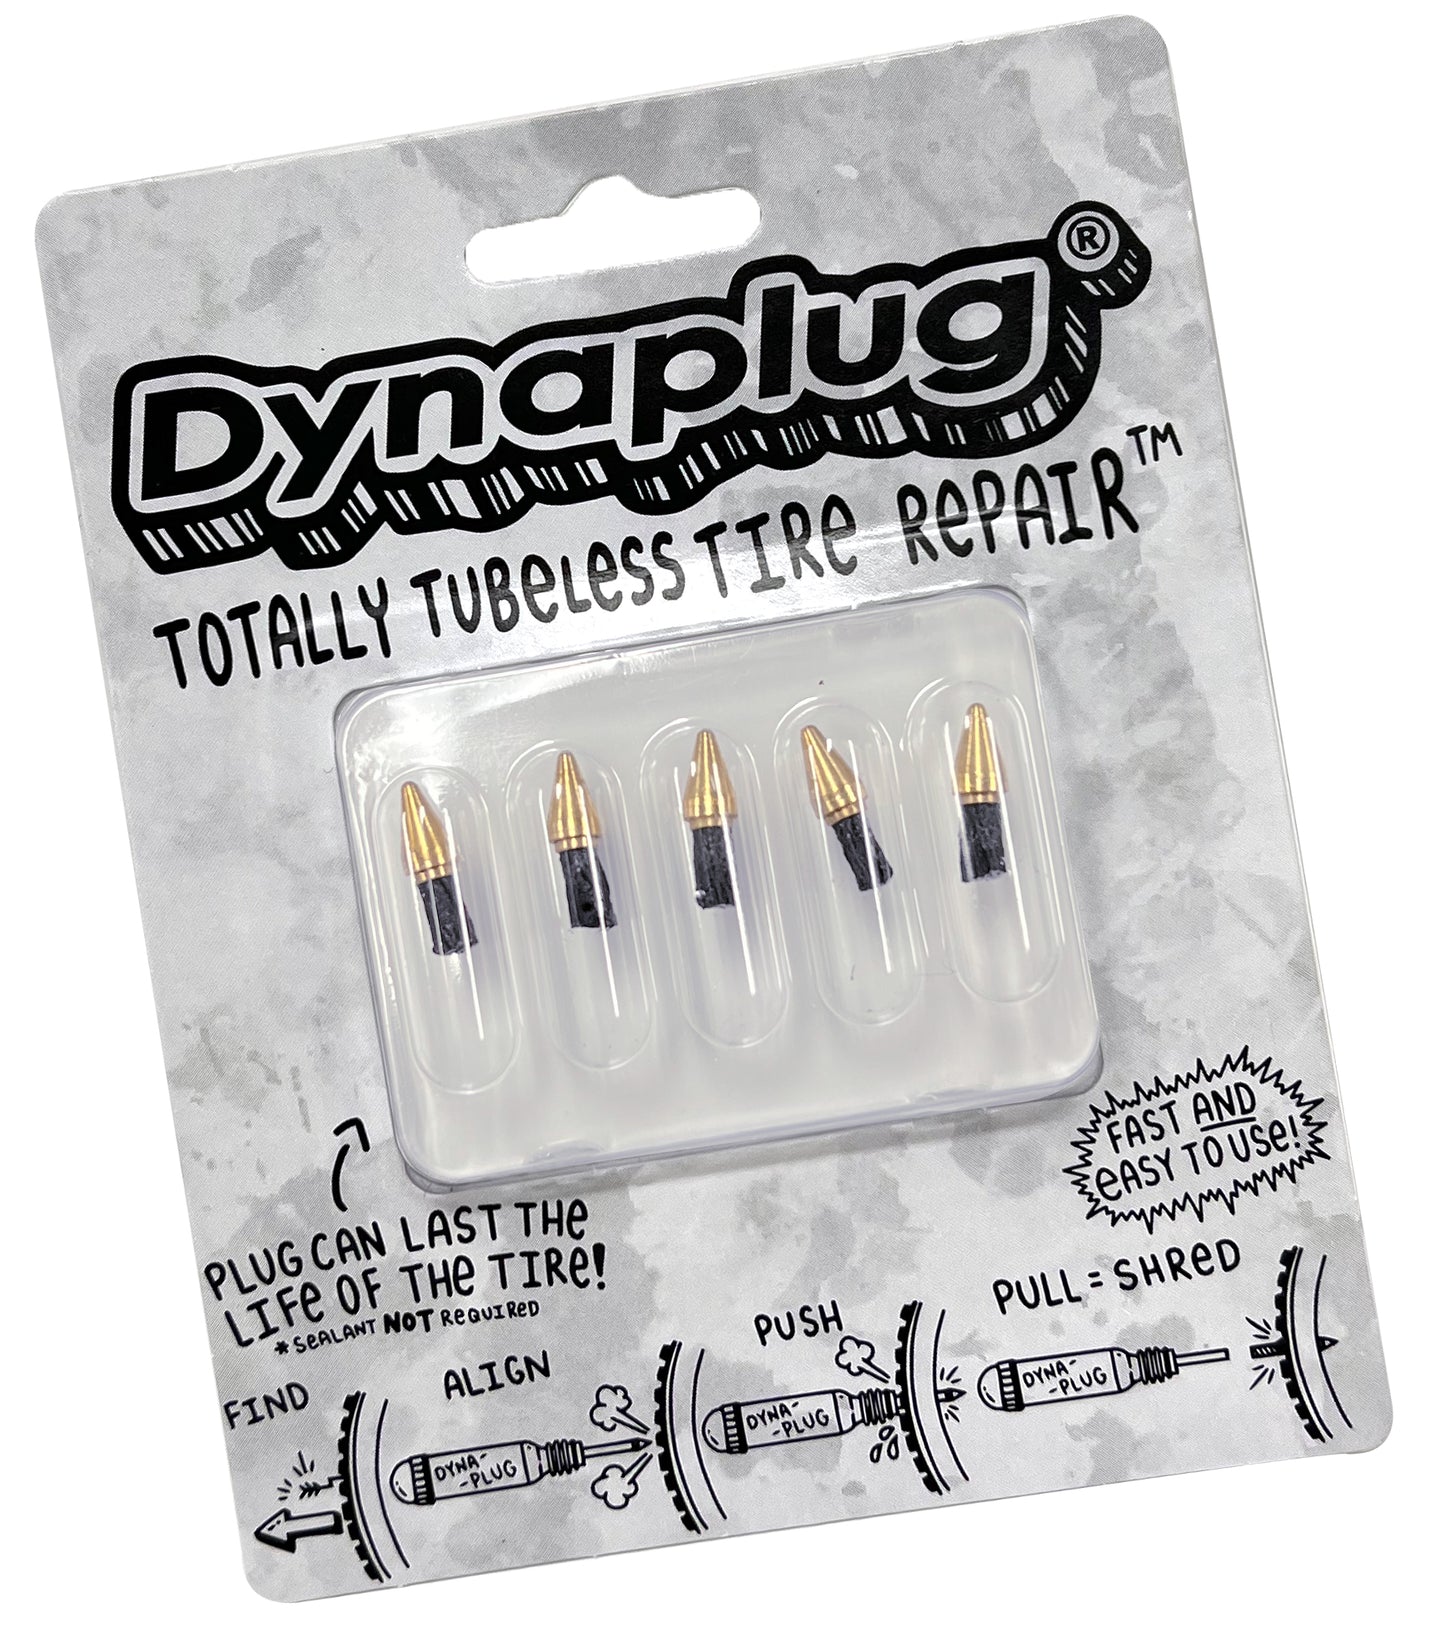 Dynaplug Air Tubeless Bicycle Tire Repair Kit- assrt. colors - 701 Cycle  and Sport